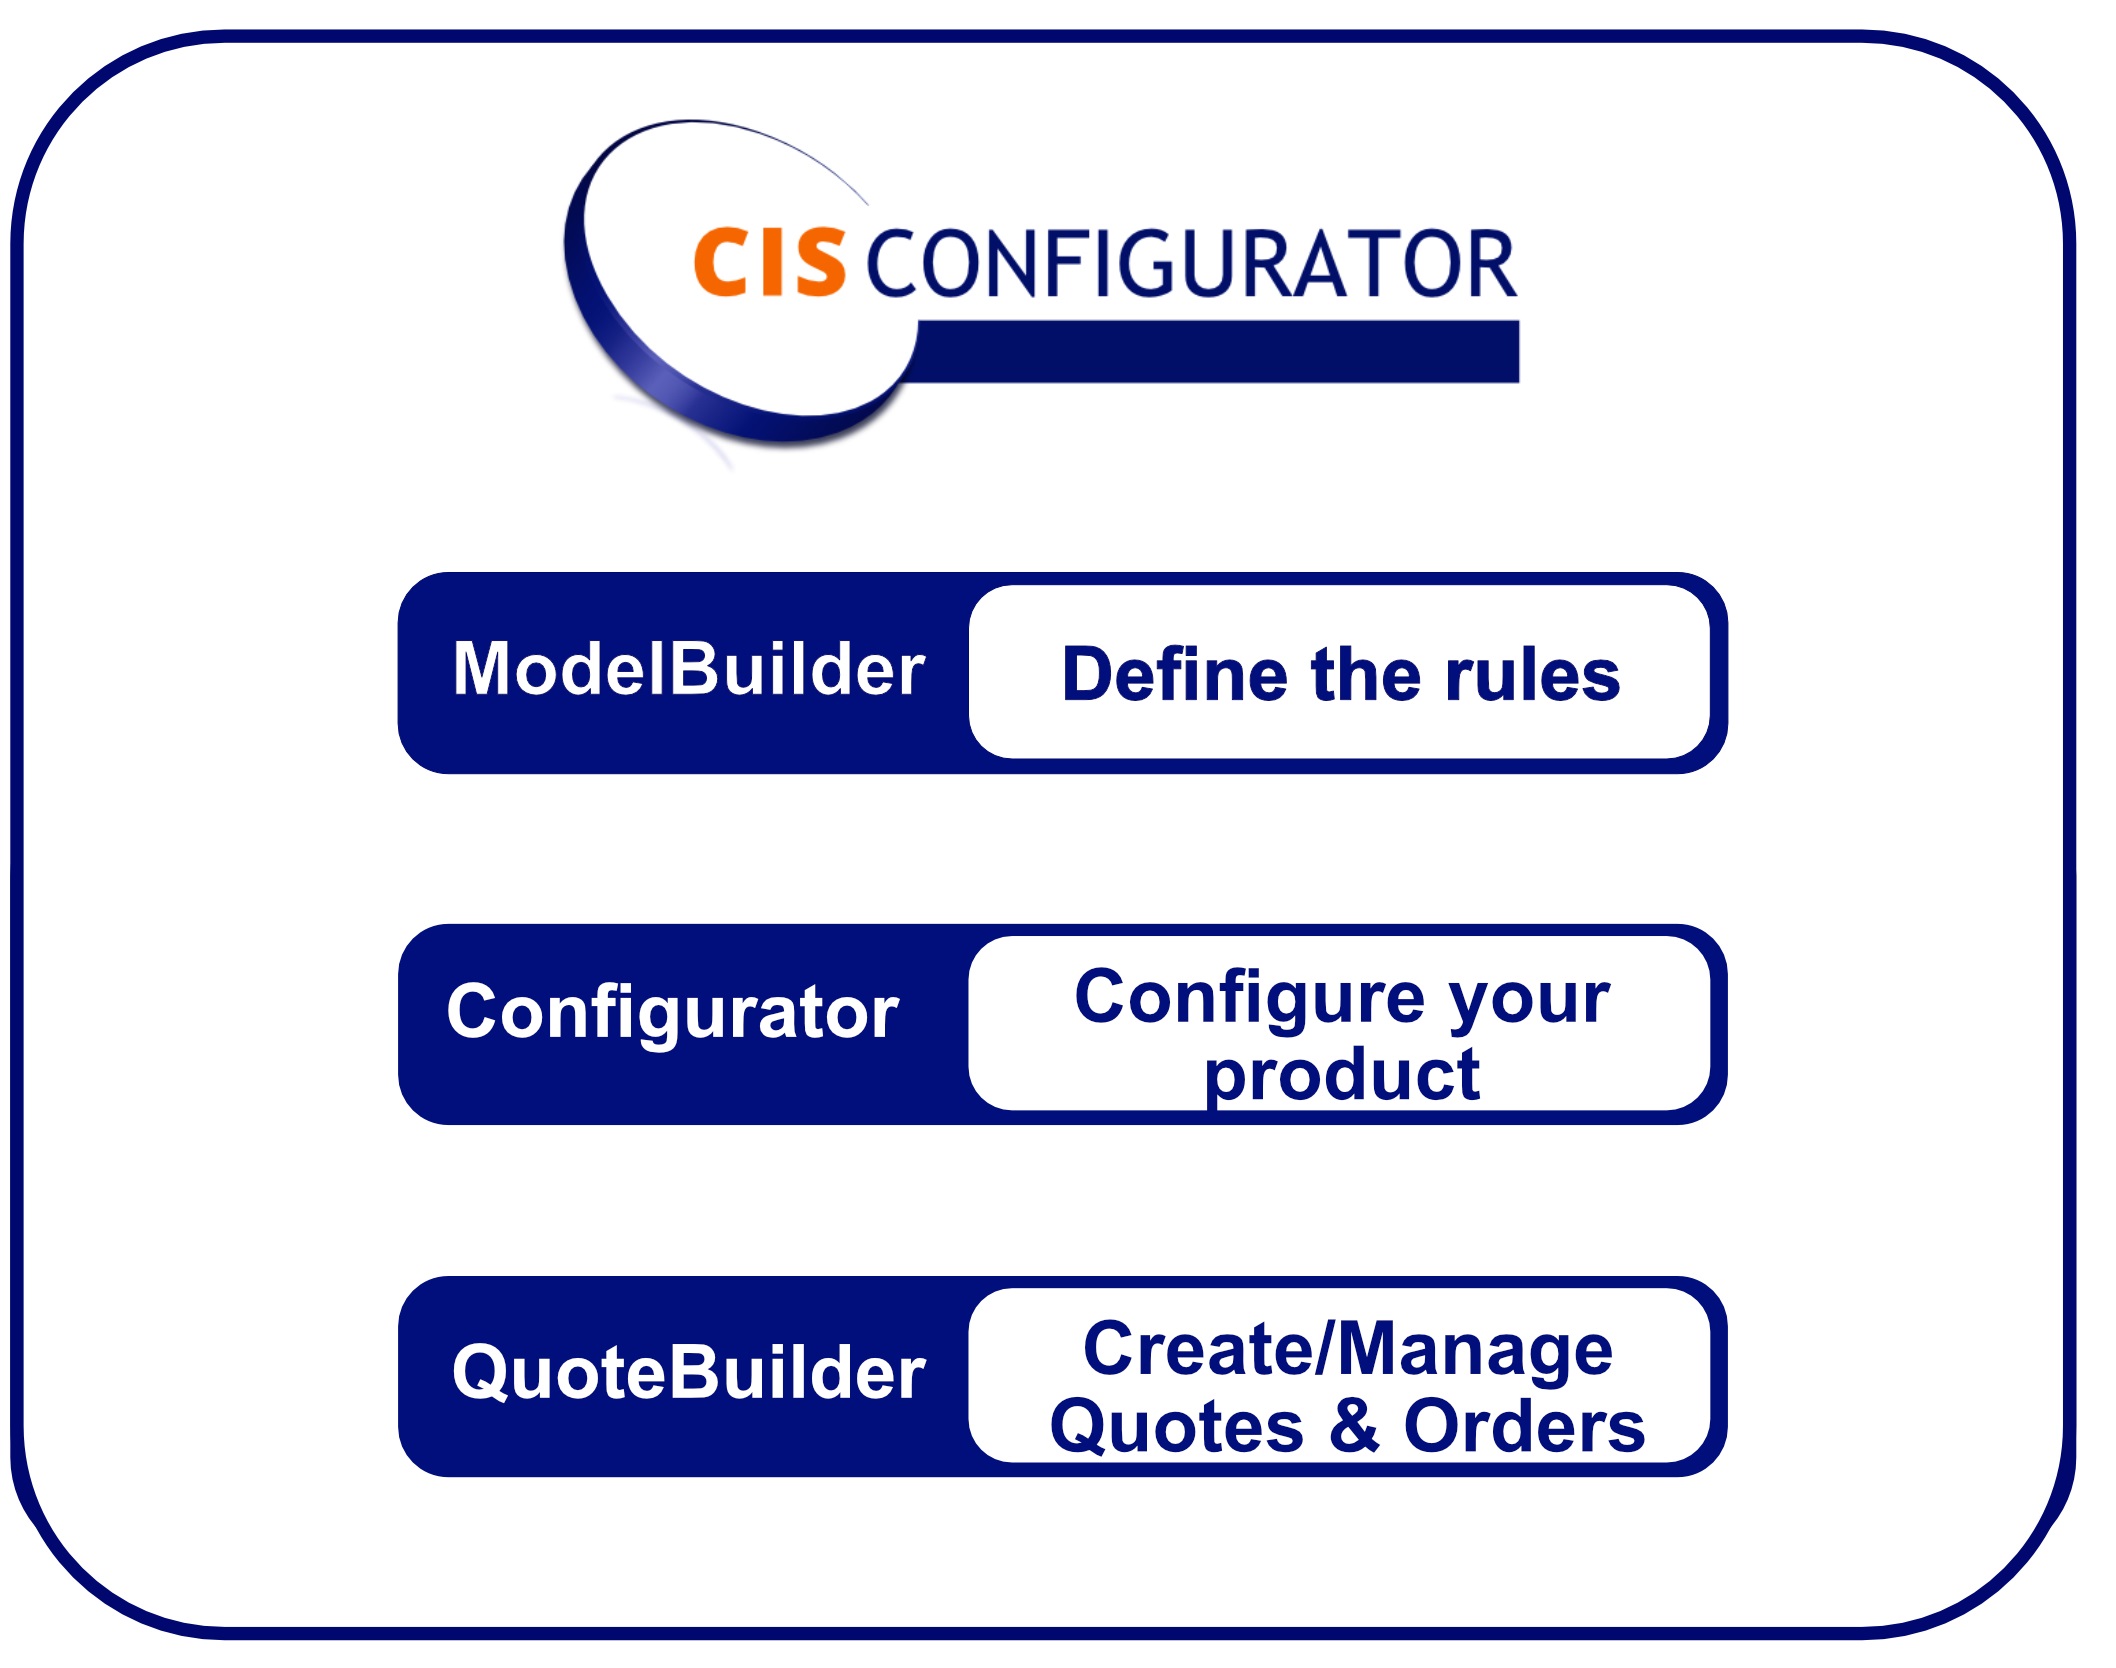 CIS Configurator is made up of three components, Configurator, ModelBuilder and QuoteBuilder. ModelBuilder is where your product expert embeds all the rules and logic of your products. QuoteBuilder the web portal allowing the users to create quotes/orders